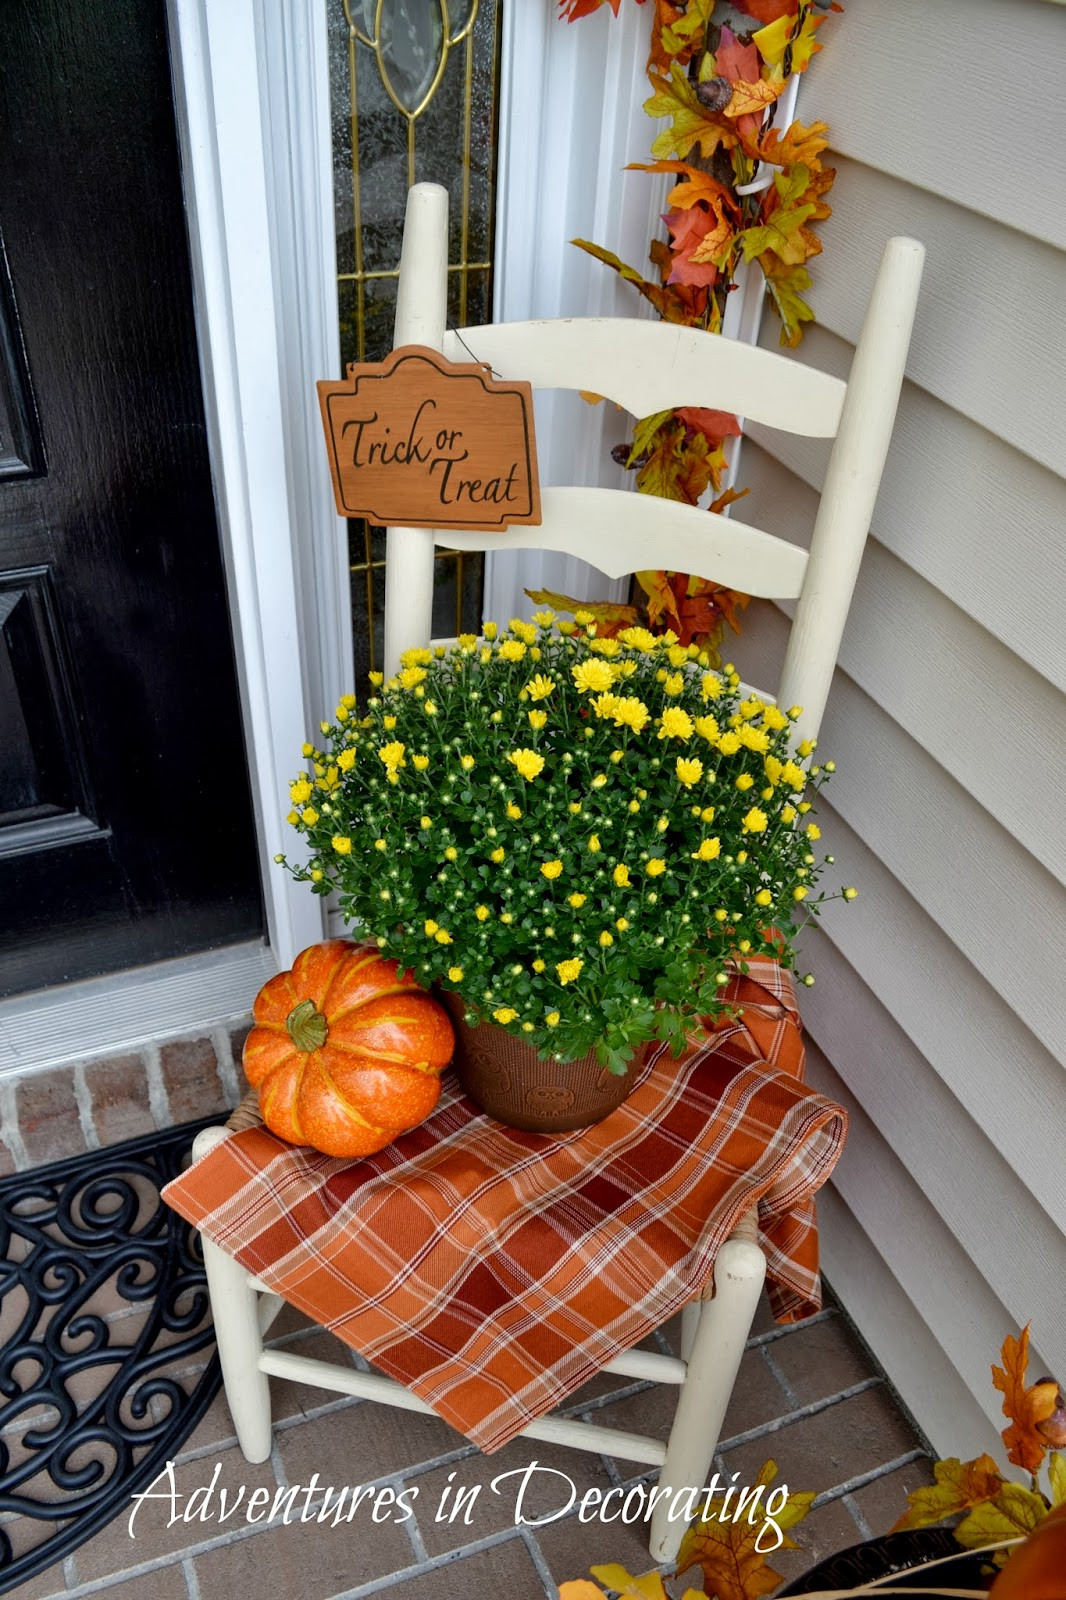 Fall Decoration For Porch
 Adventures in Decorating Our Fall Front Porch